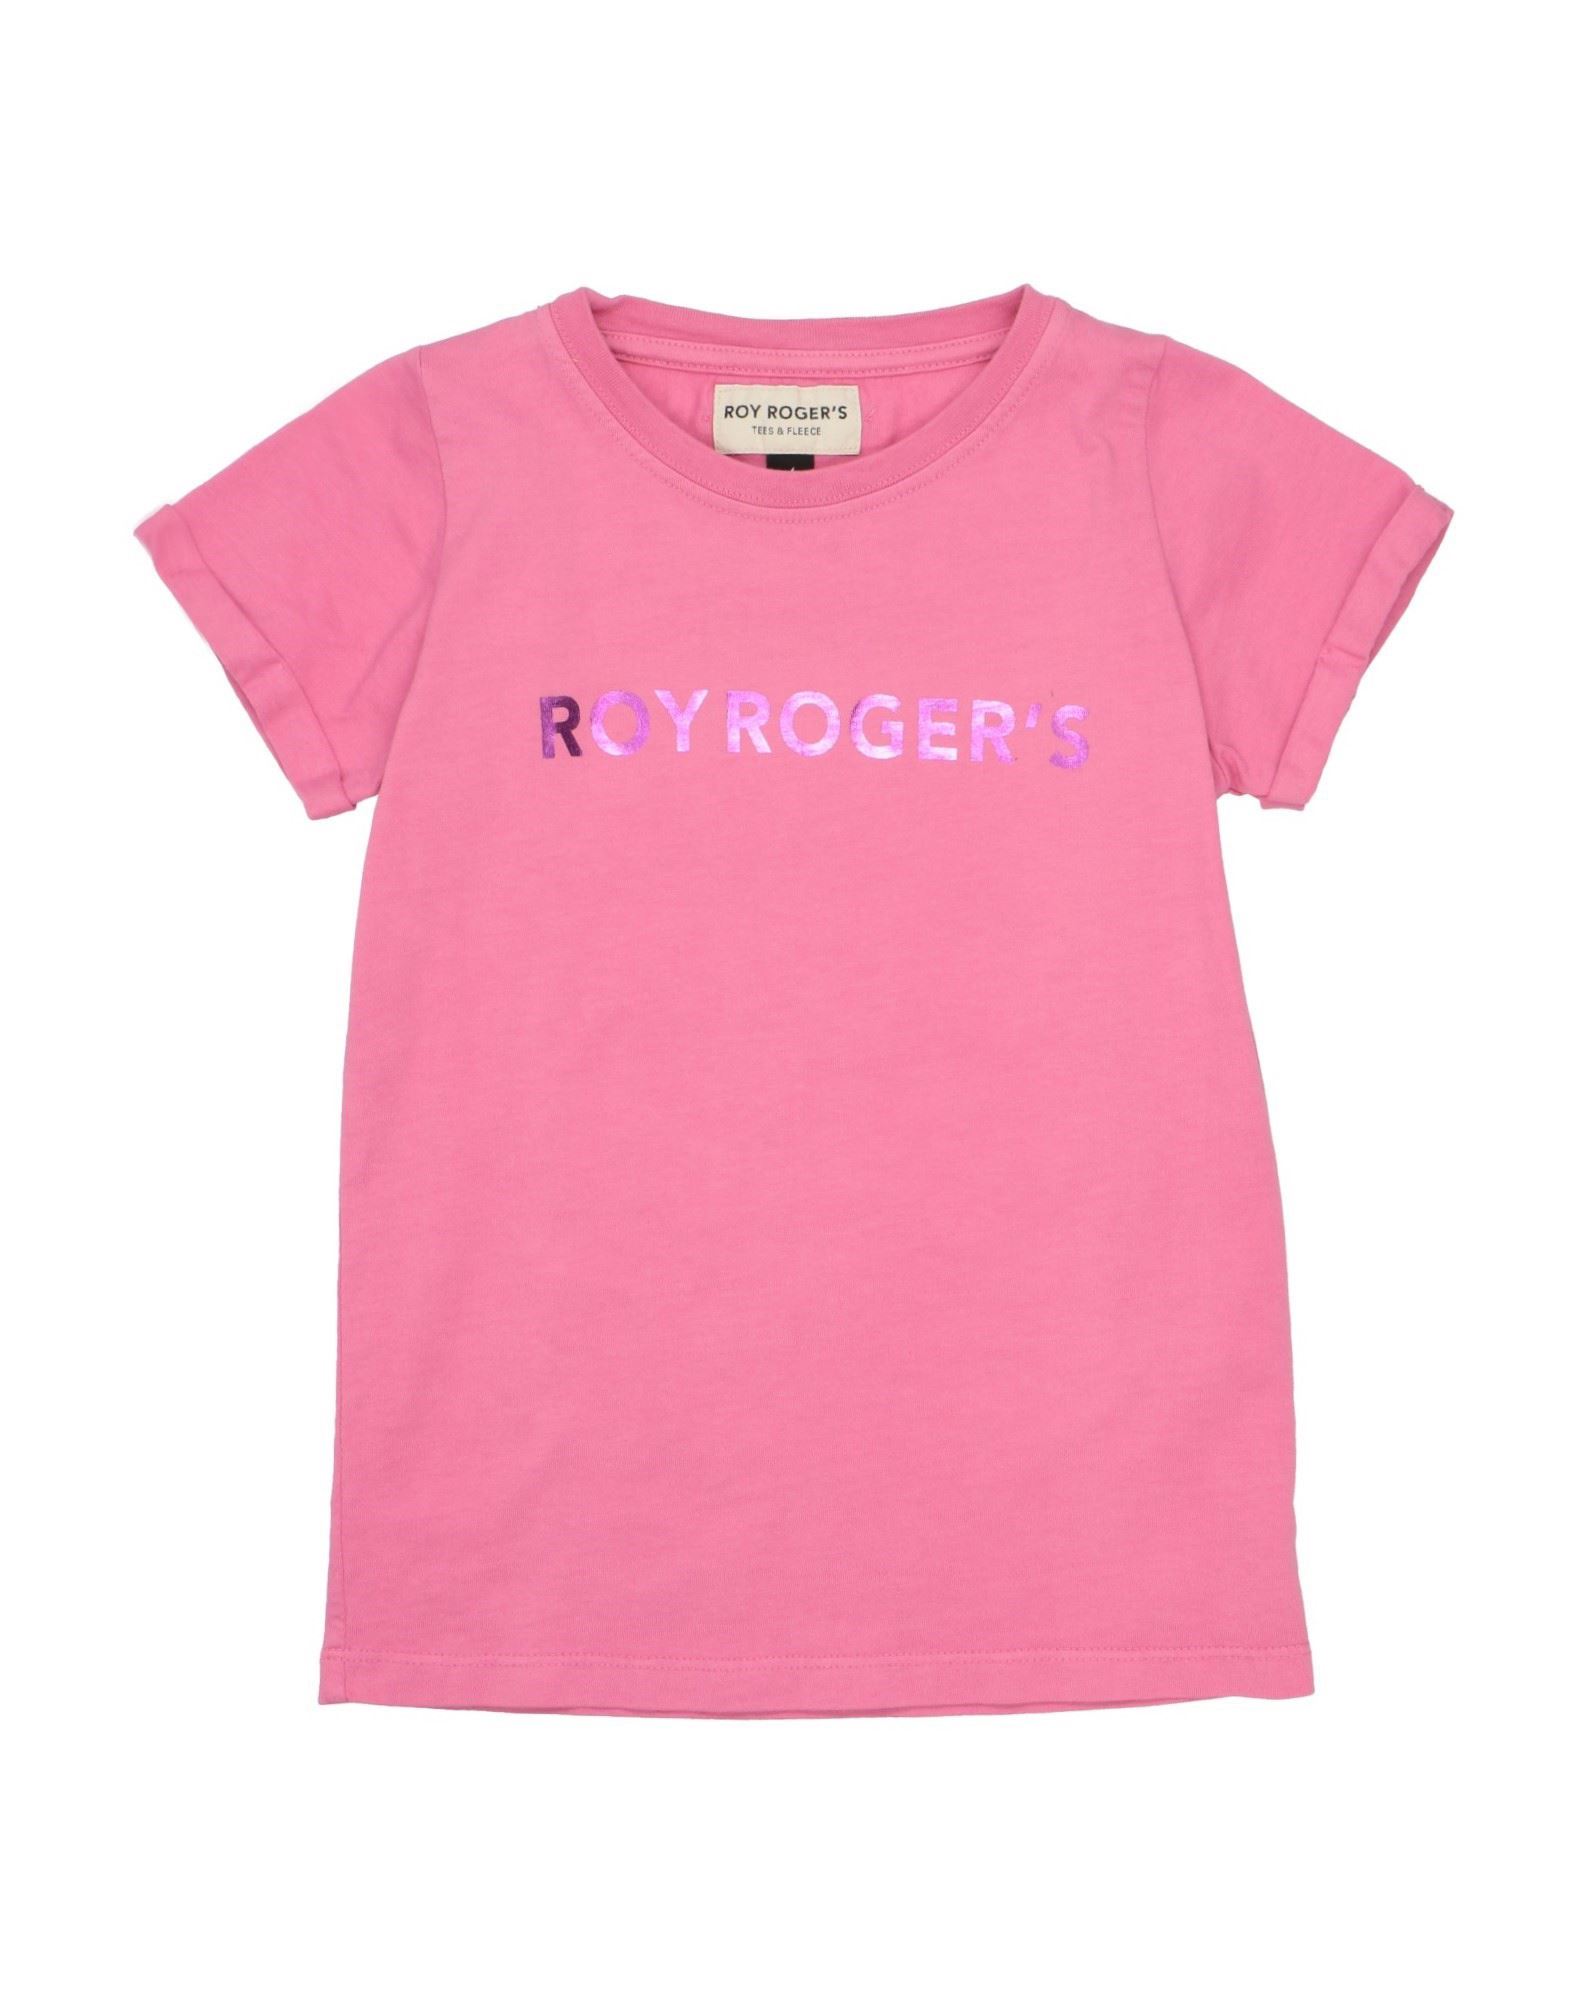 Roy Rogers Kids' Roÿ Roger's Toddler Girl T-shirt Pink Size 4 Cotton